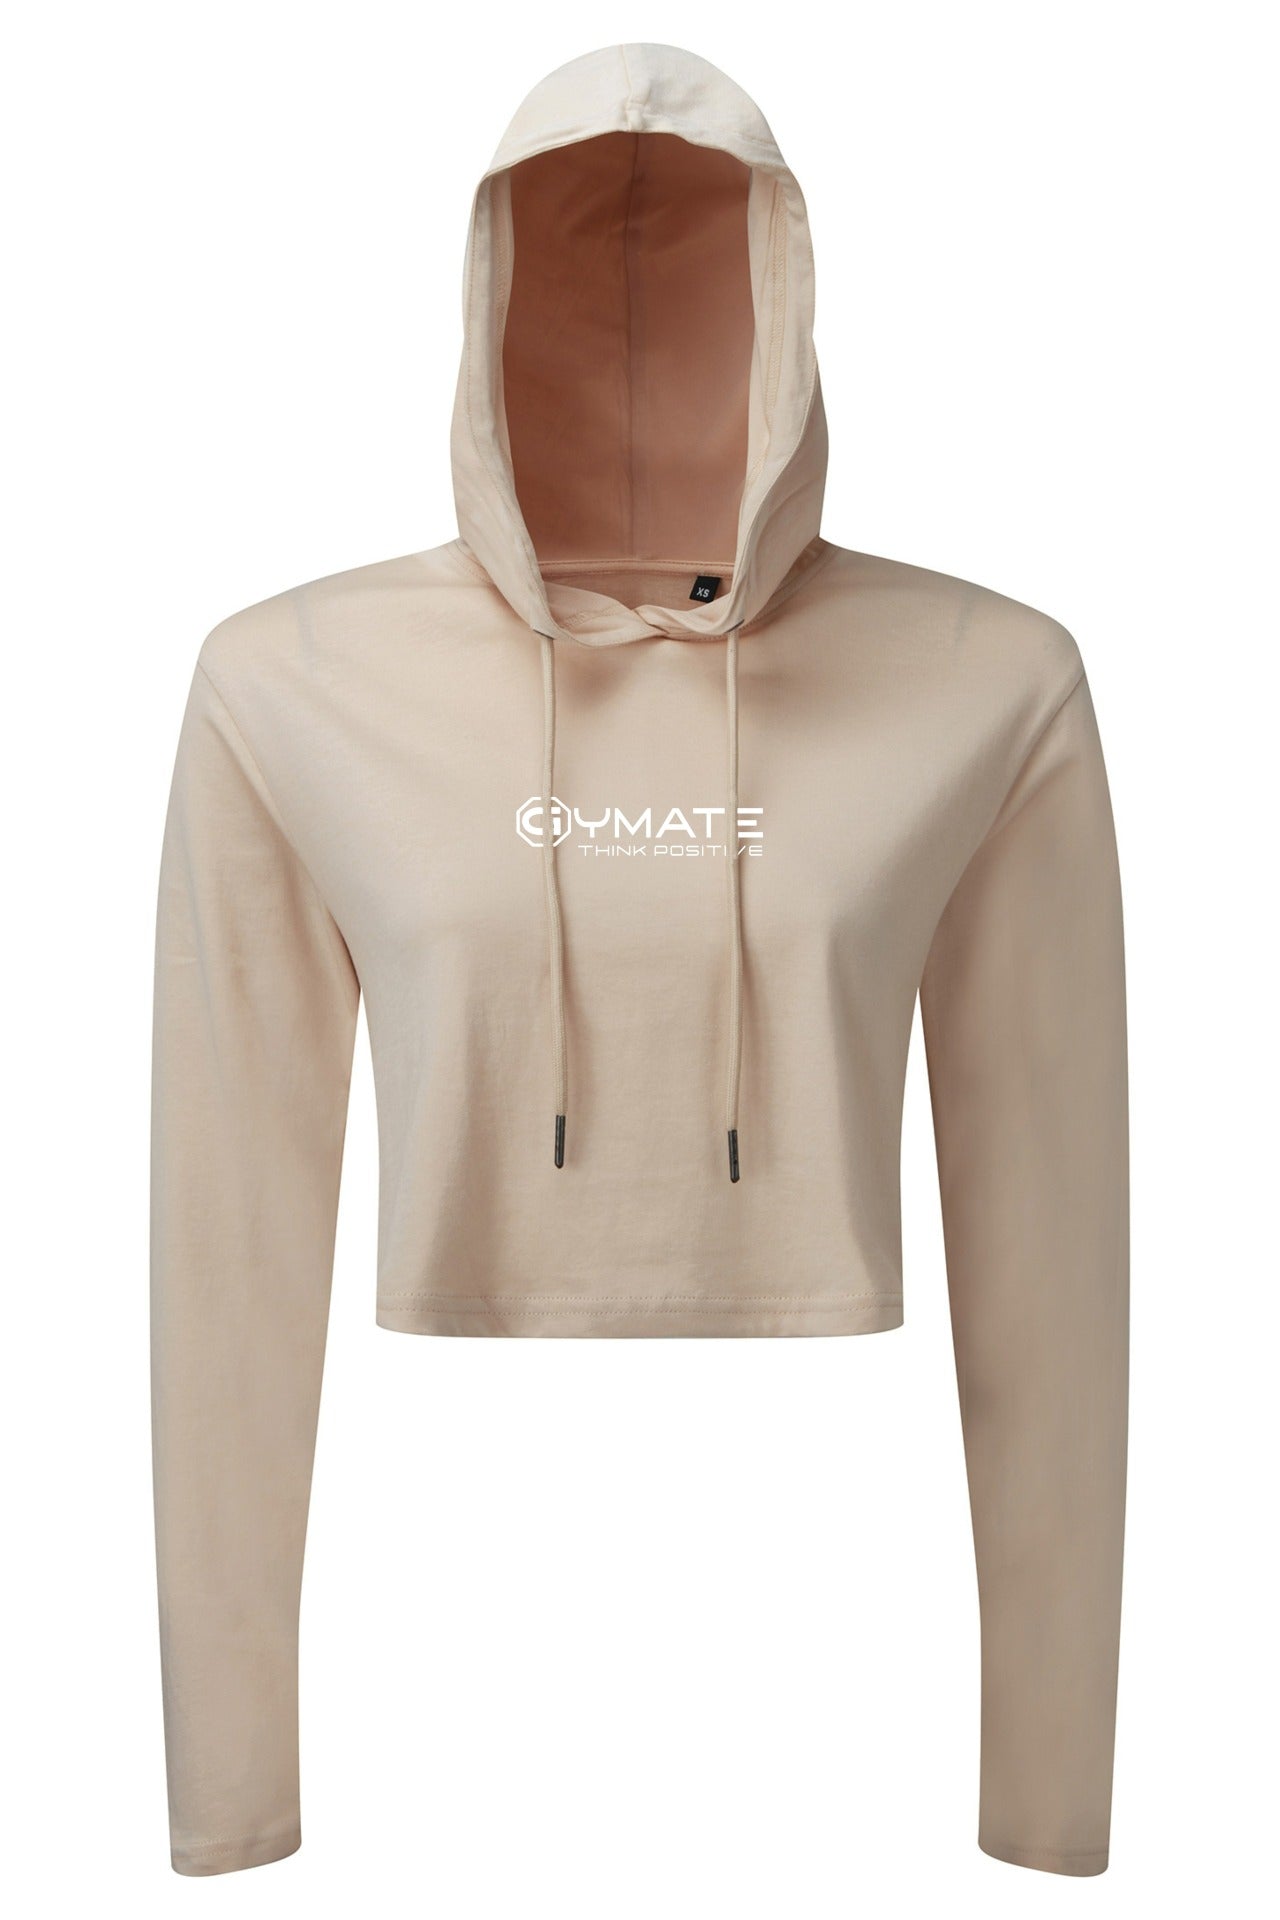 Gymate Pro cropped hooded t shirt natural